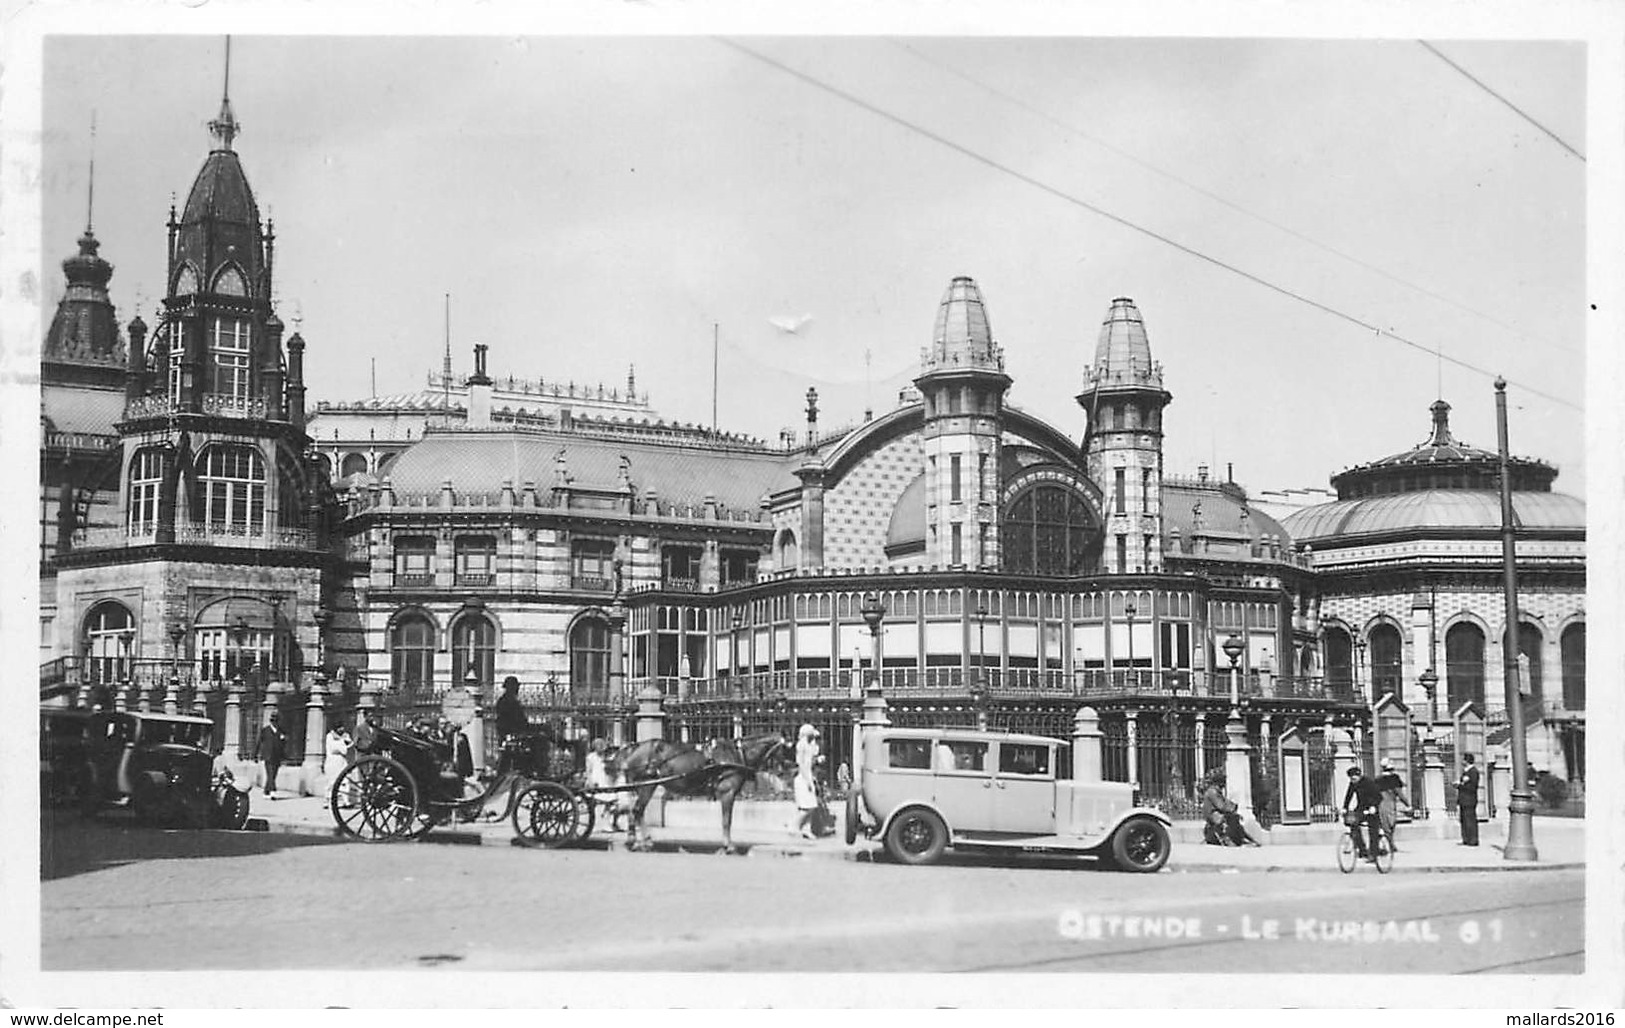 OSTENDE - LE KURSAAL ~ A REAL PHOTO CARD POSTED IN 1935 #88003 - Oostende